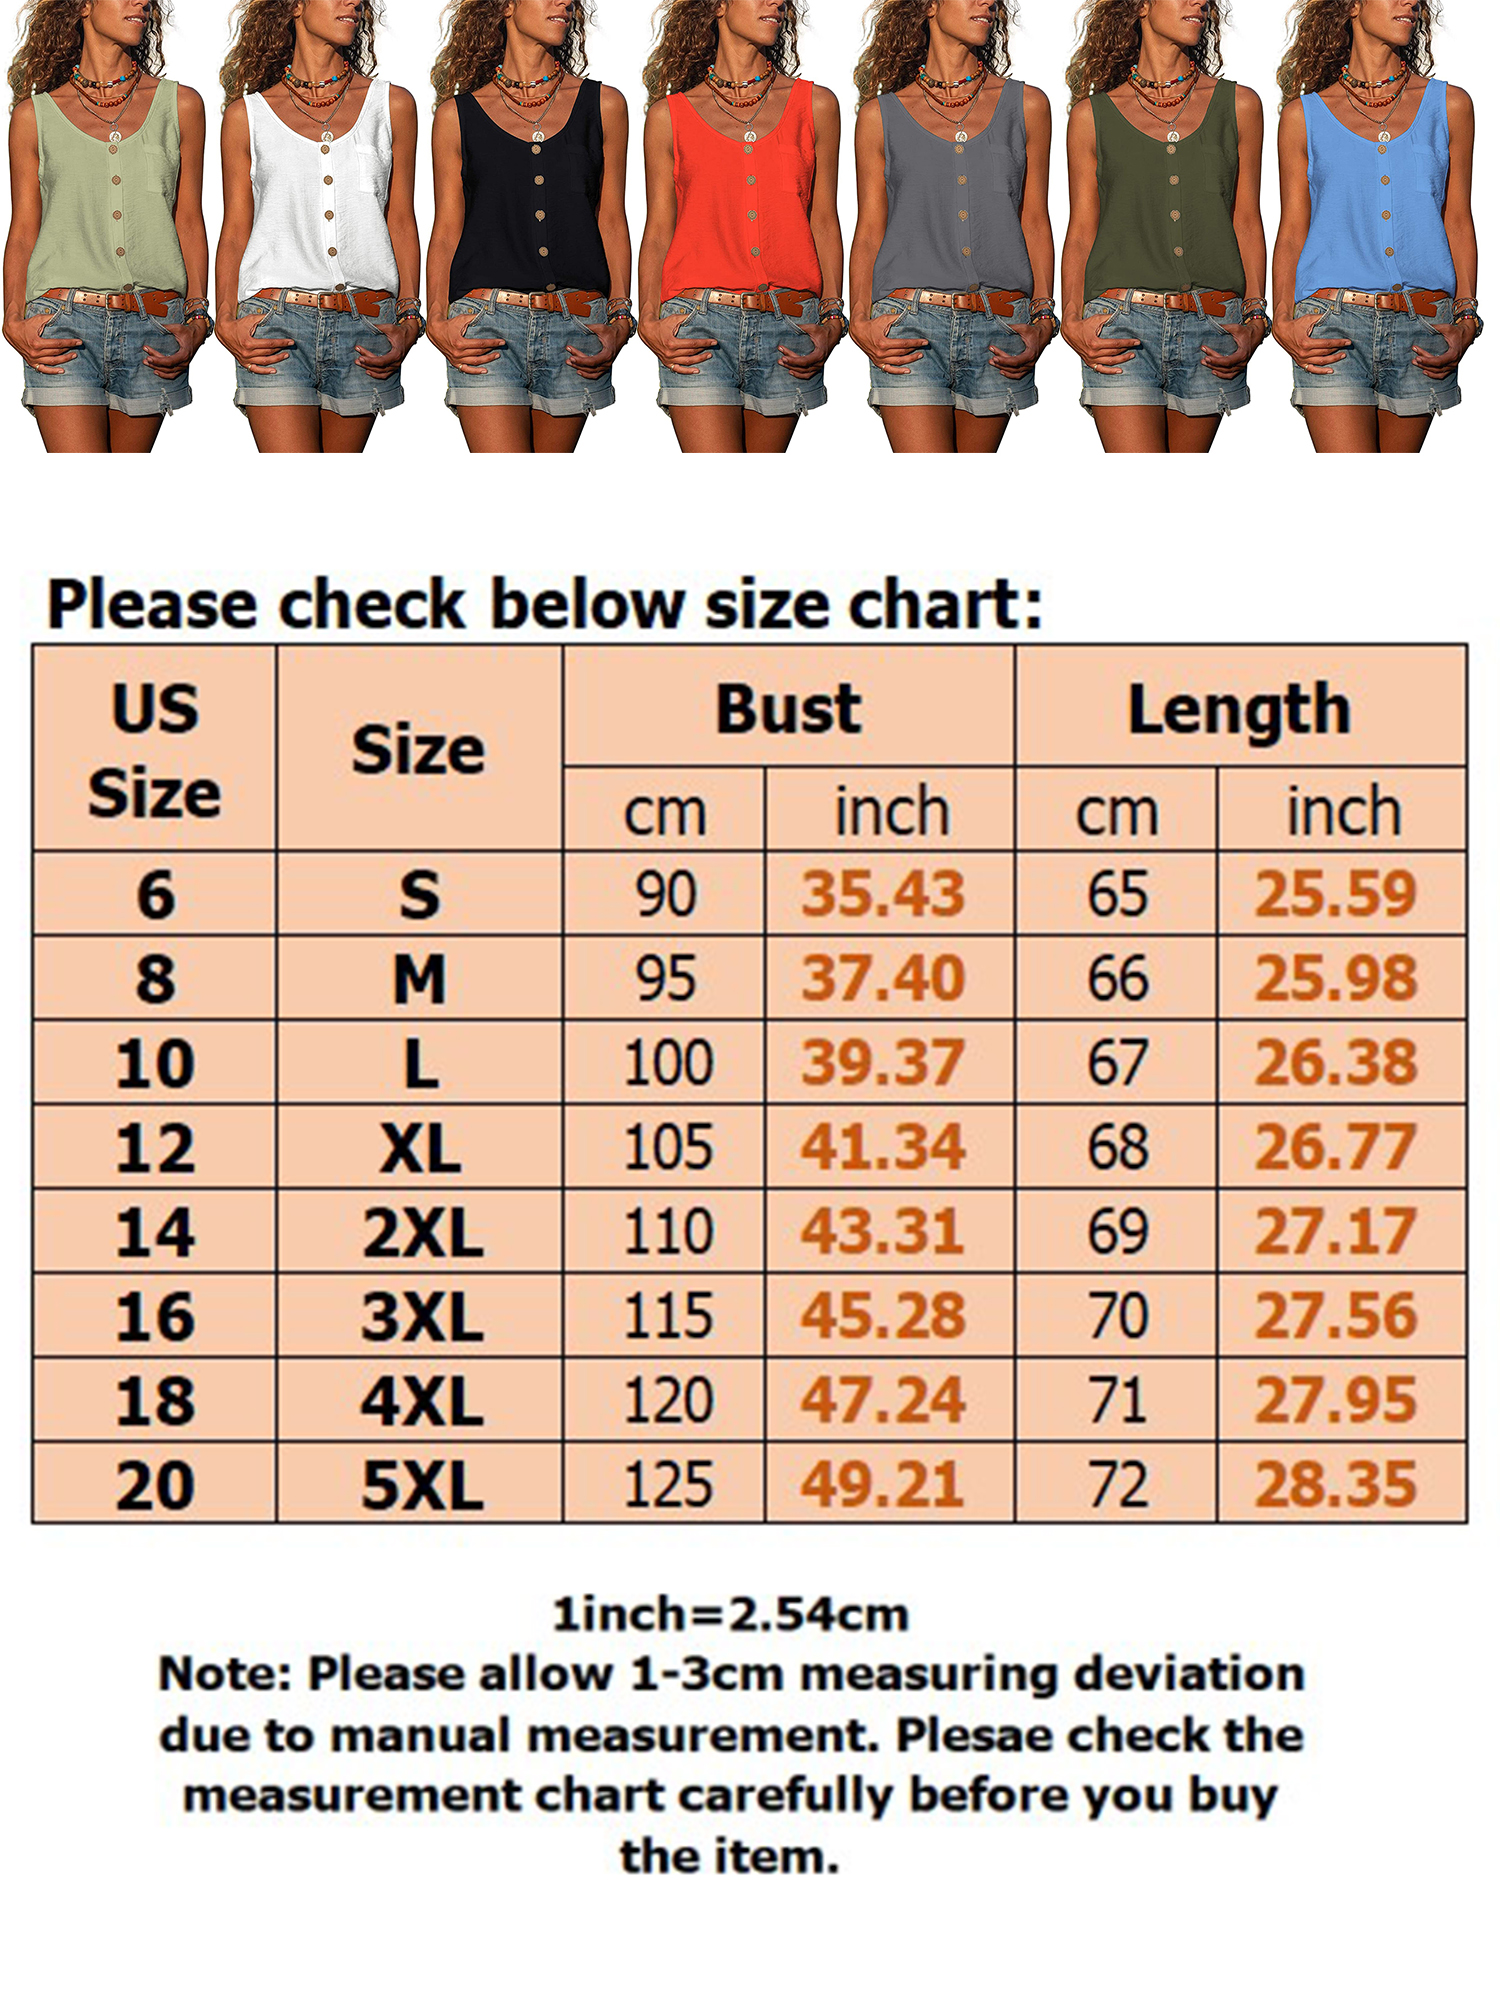 Women Summer Henley Cami Tank Tops Button Down Shirts Workout Casual Chiffon Sleeveless Cami Camisole Tunics Loose Fit Tees Blouse - image 2 of 3